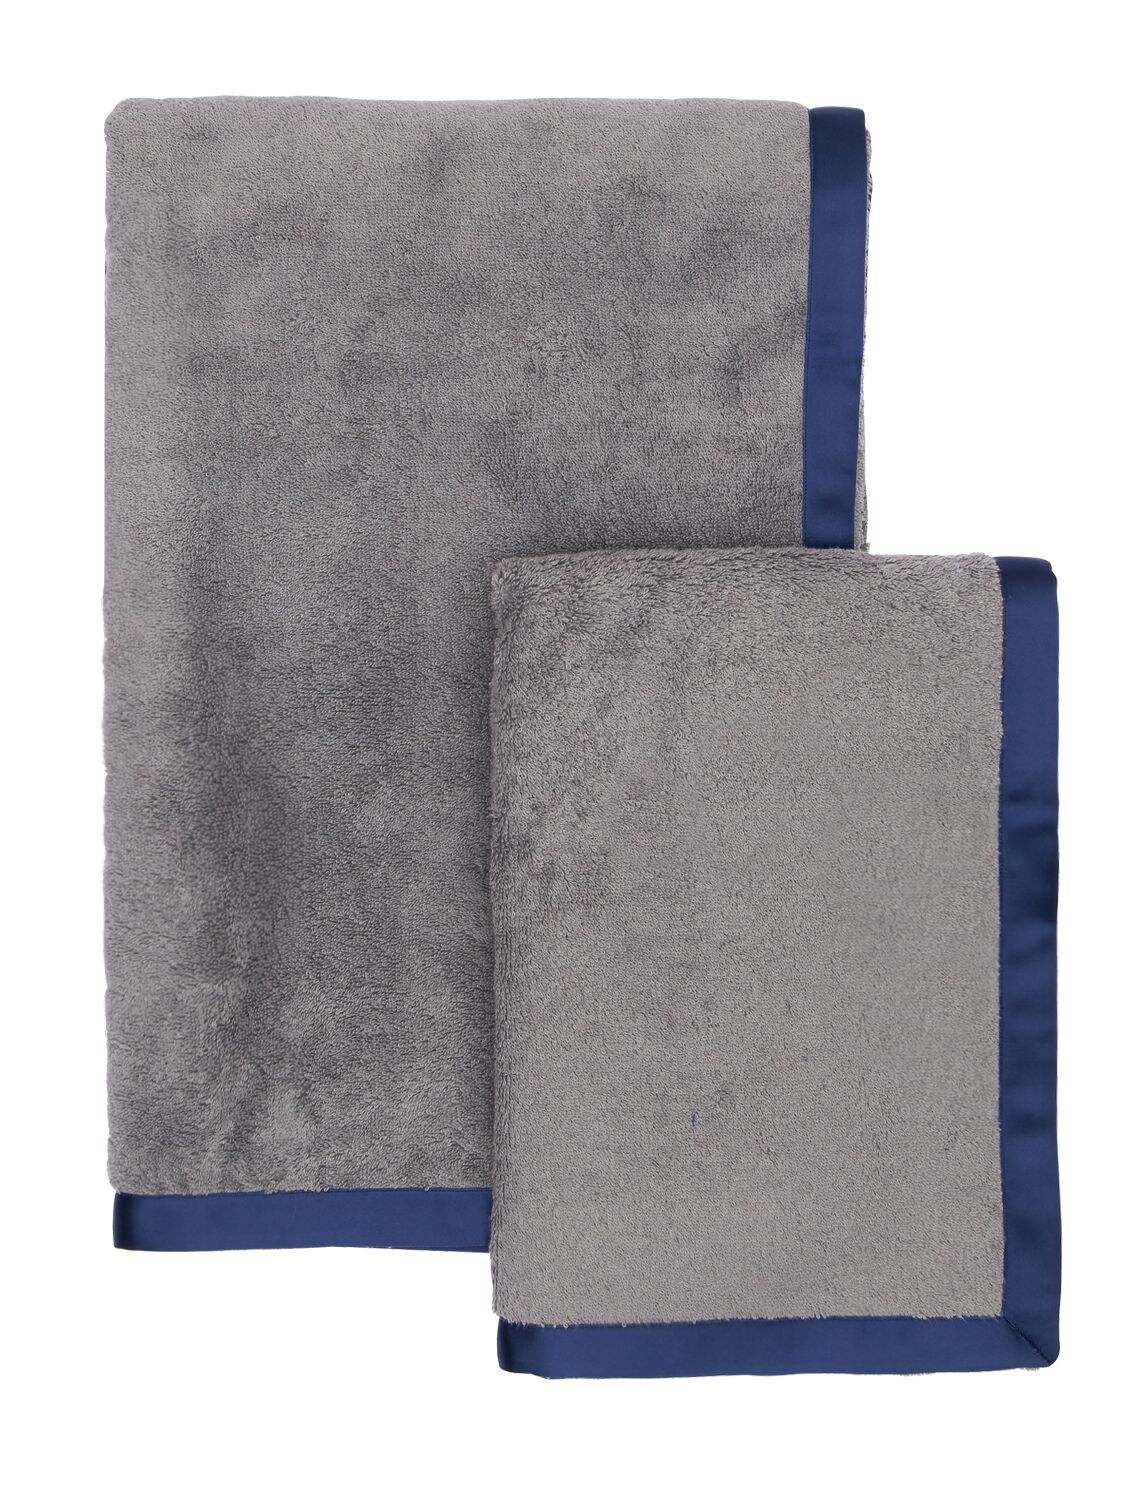 Alessandro Di Marco Set Of 2 Cotton Terrycloth Towels In Grey,blue